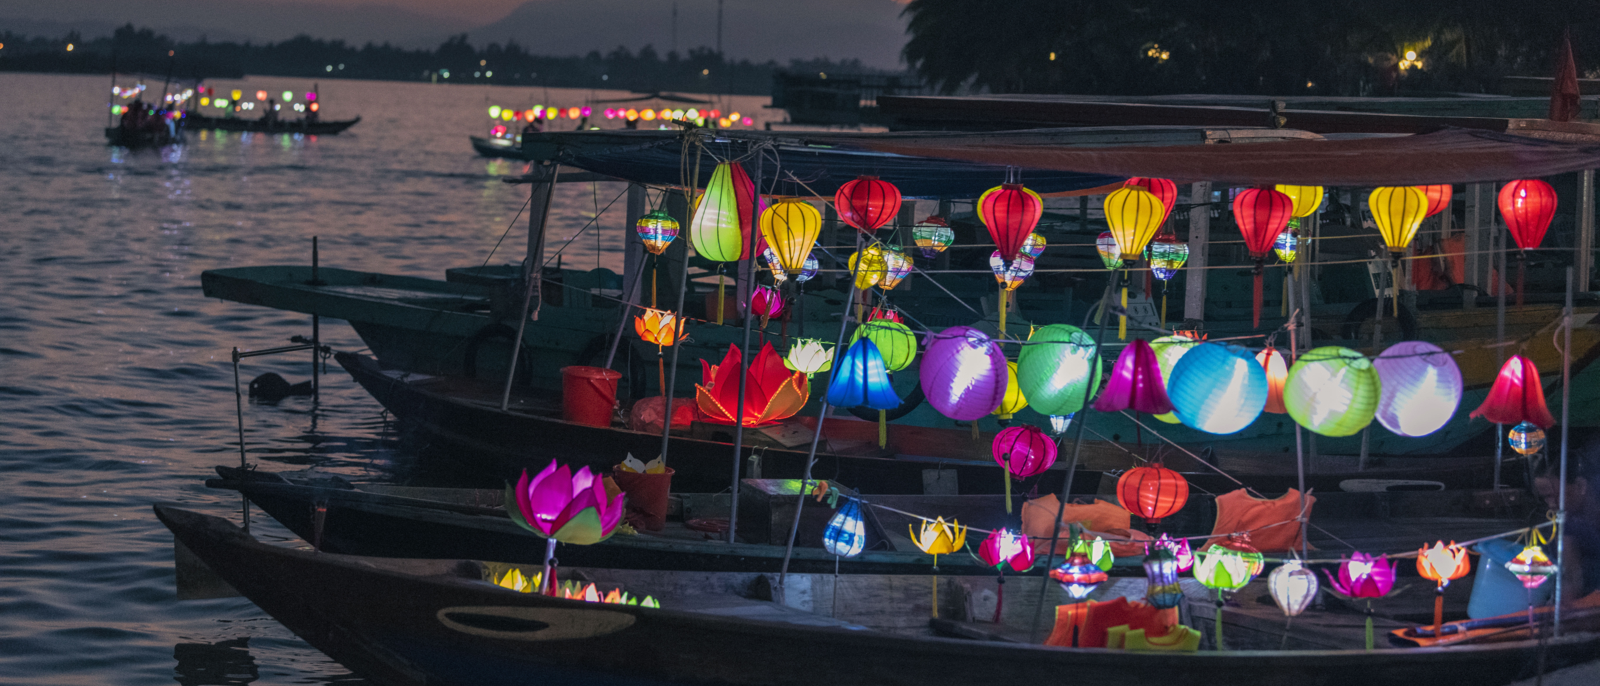 Lanterns and Boat in Hoi An, Vietnam